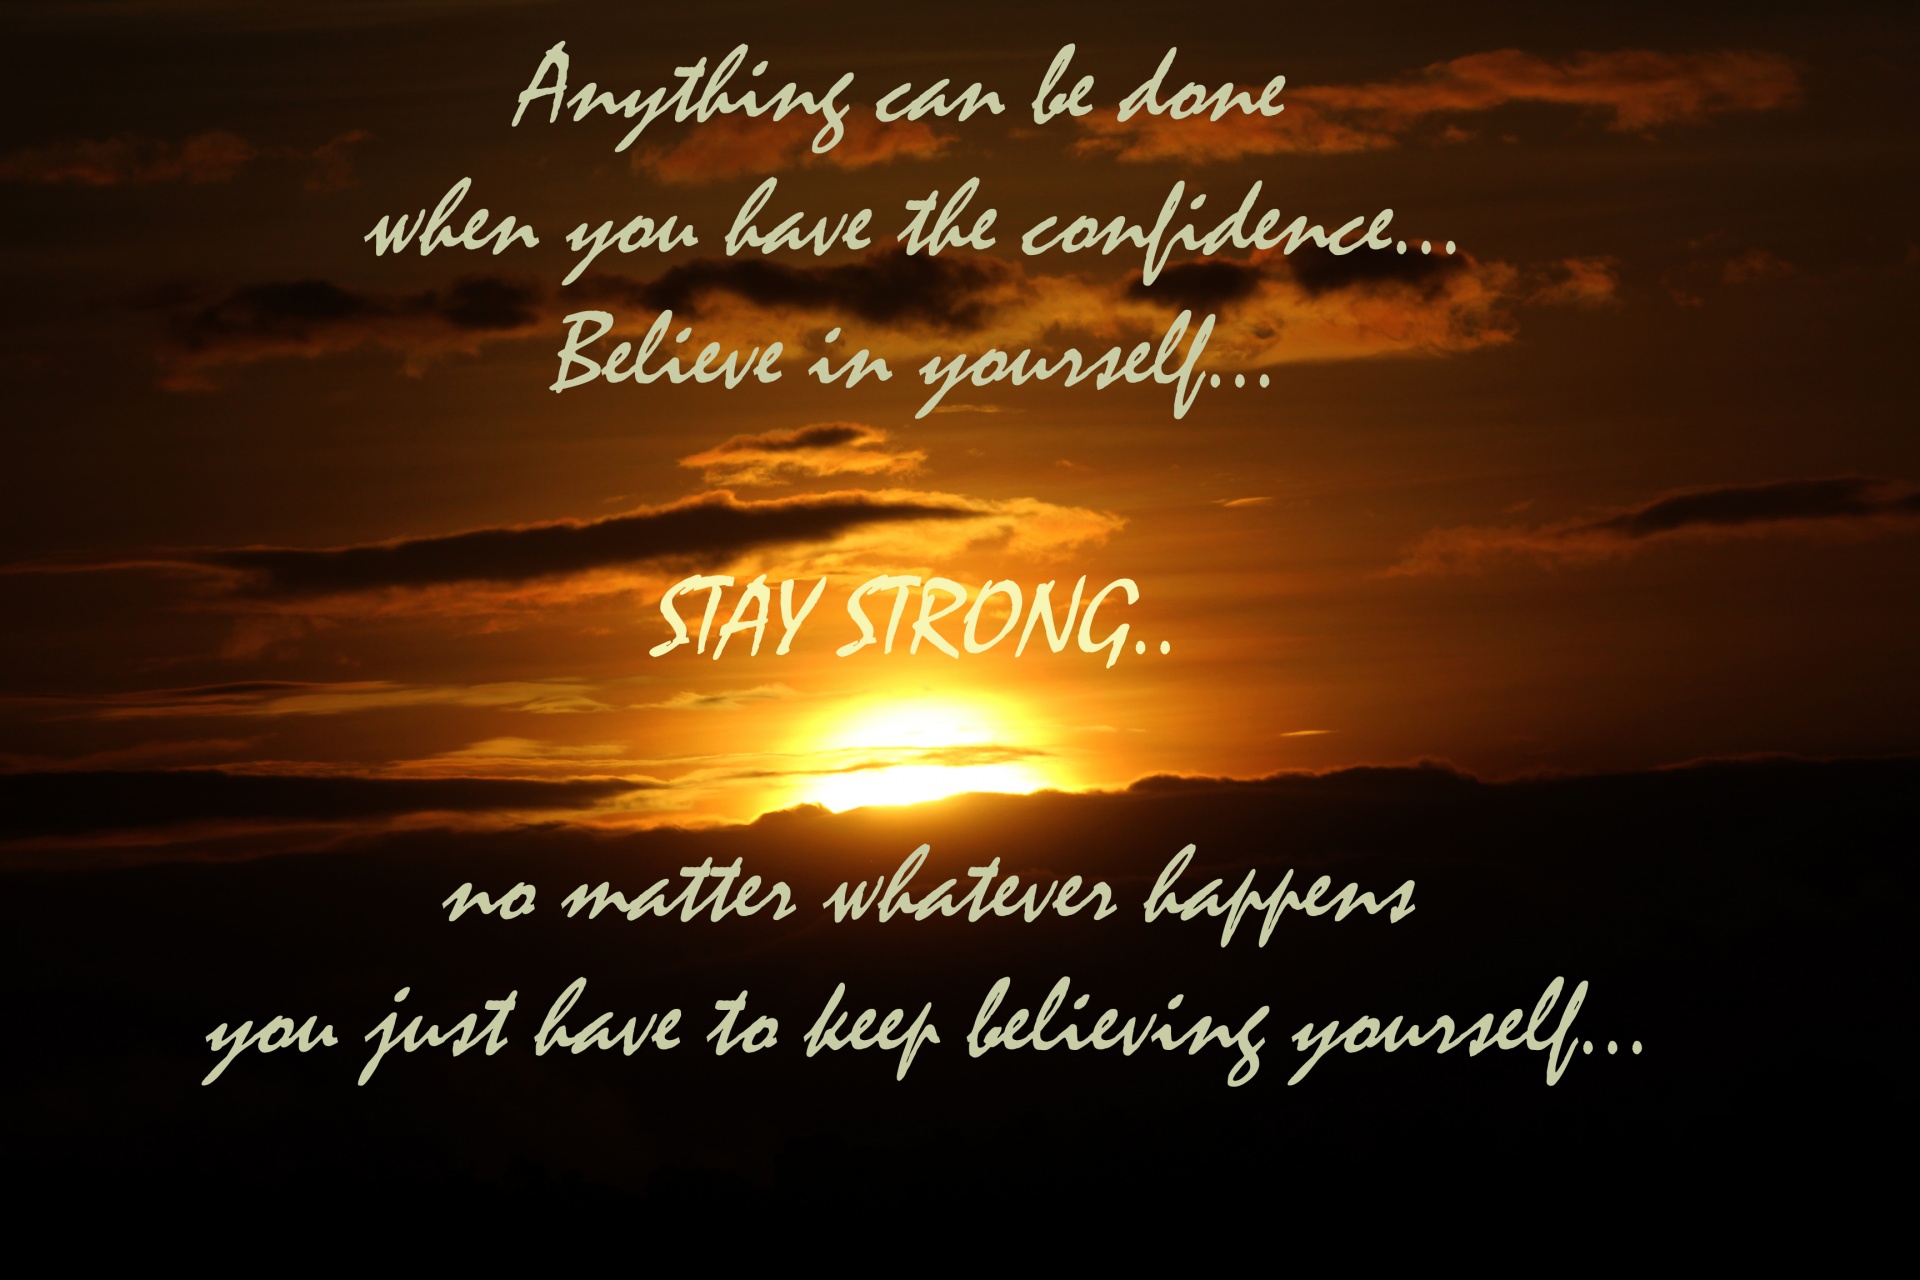 Self-confidence quotes,believe yourself quotes,encouragement quotes,stay st...